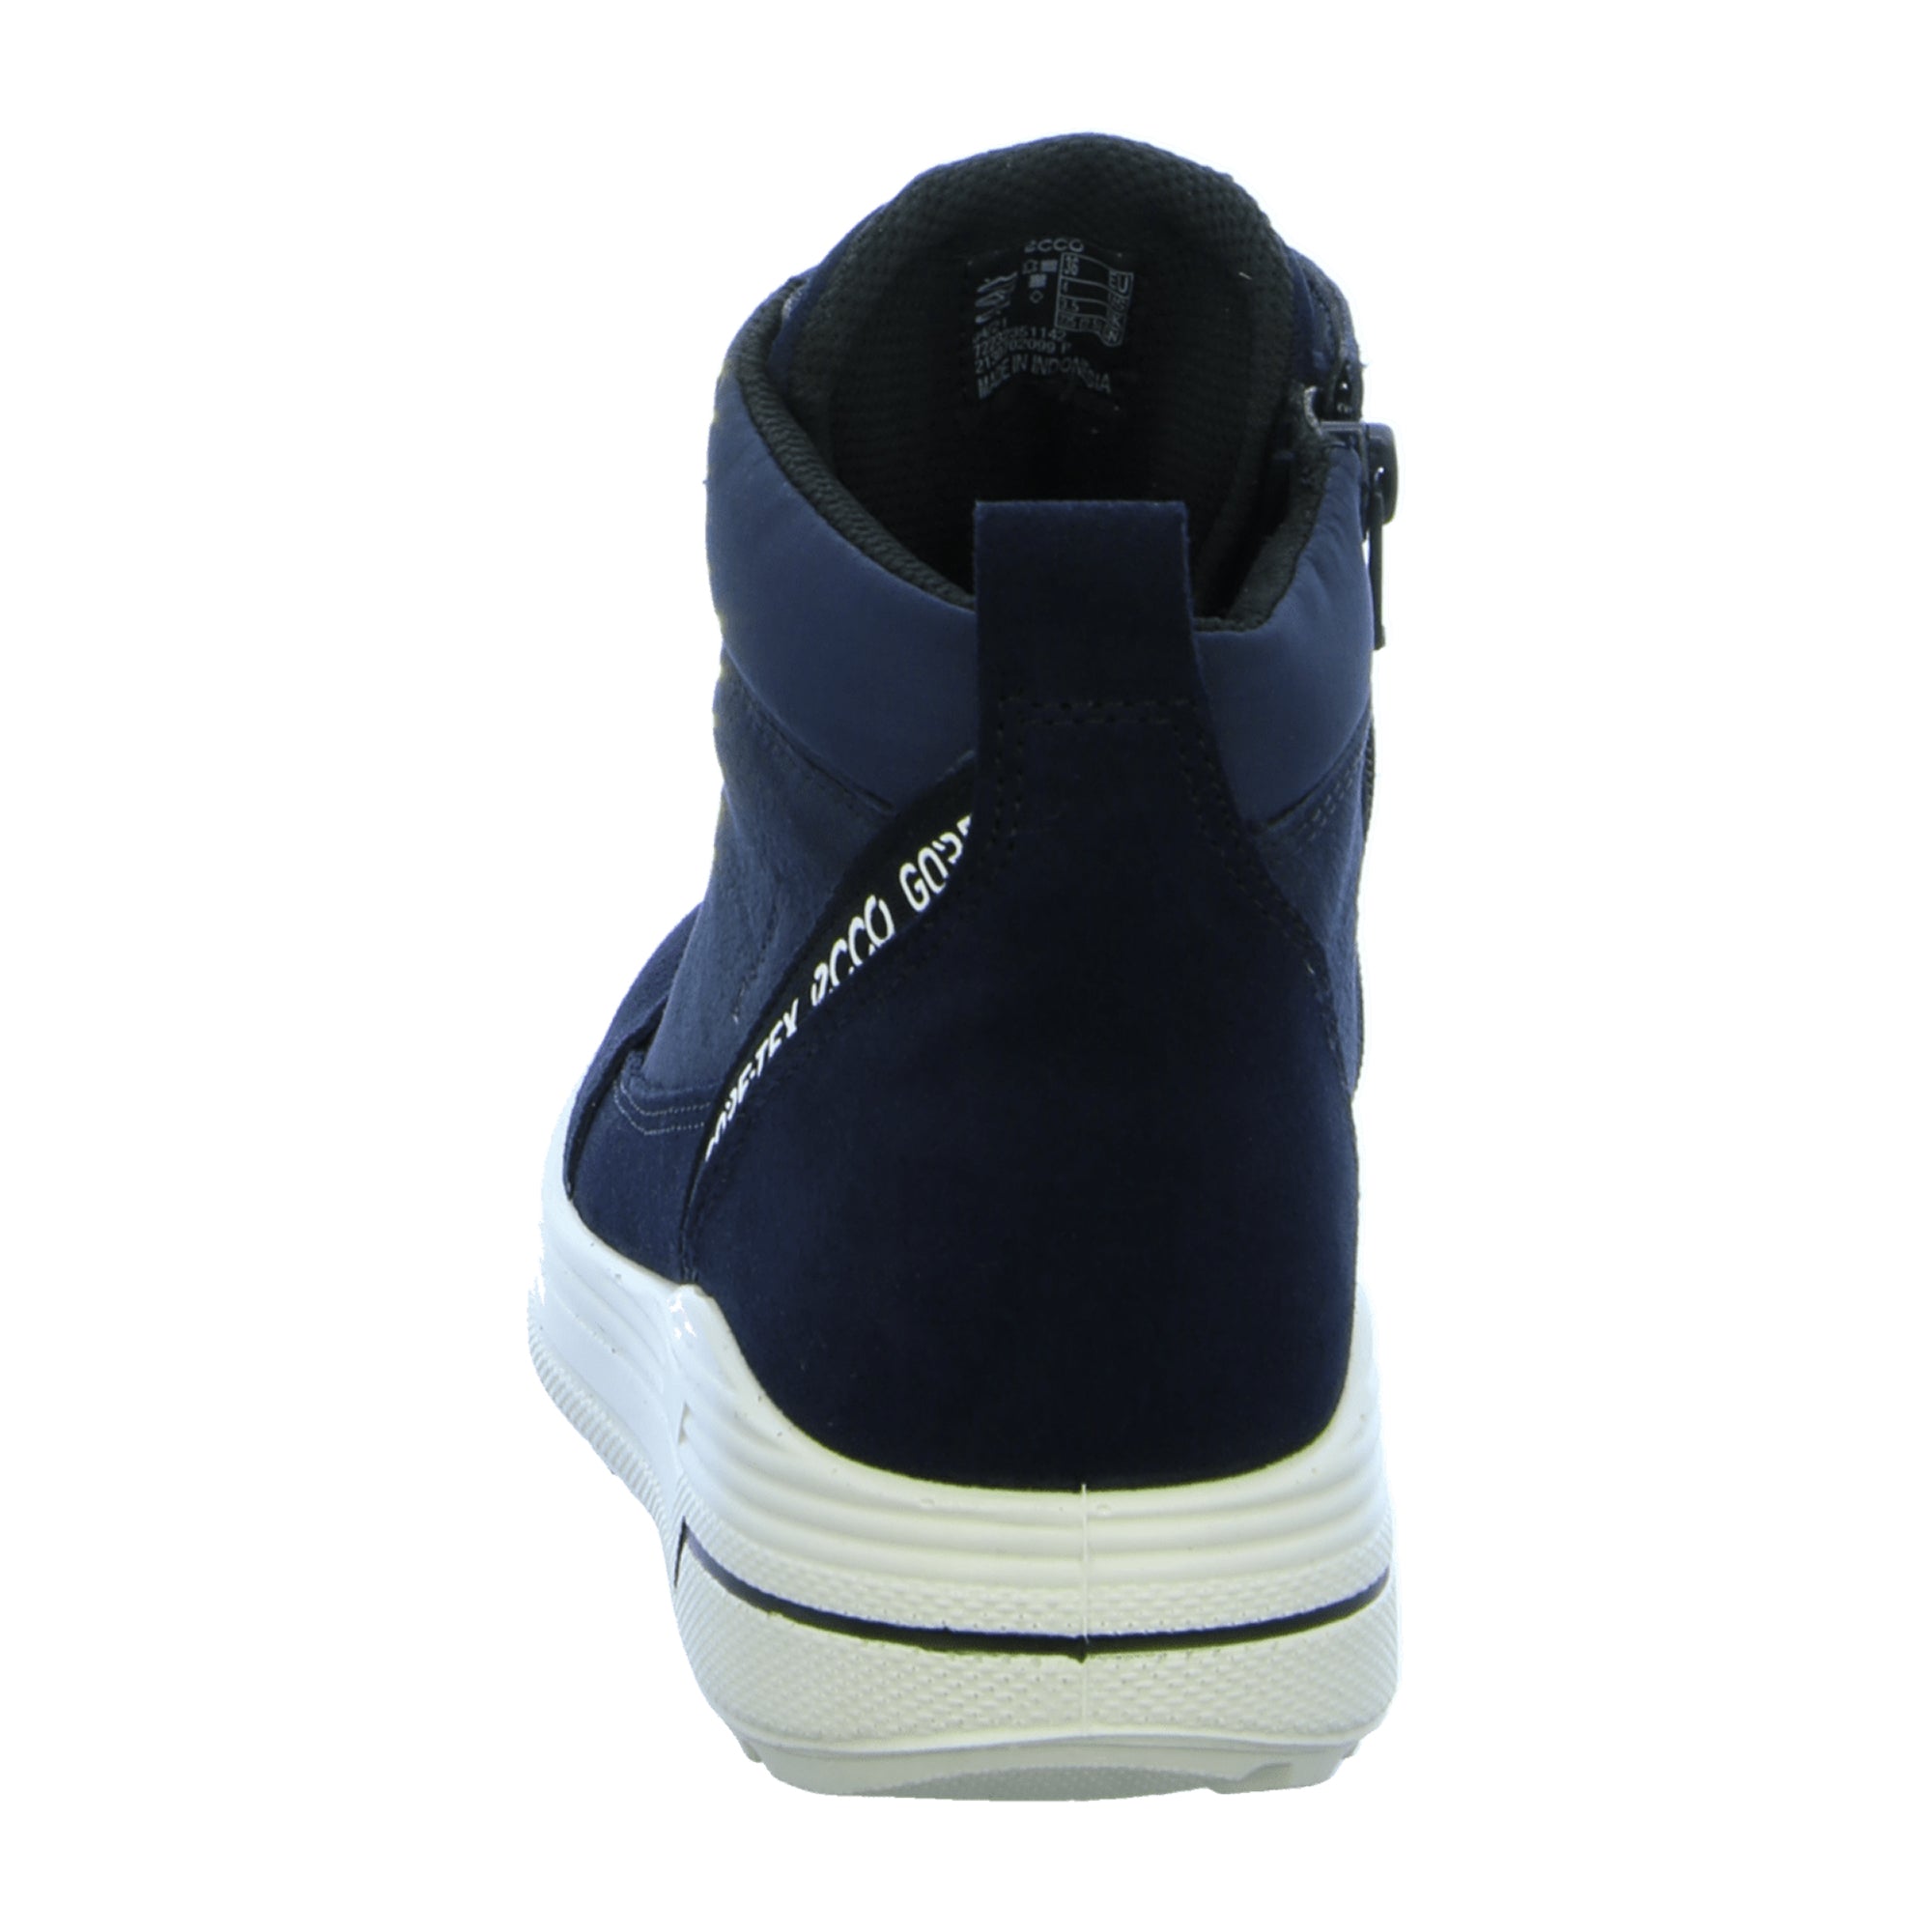 Ecco Urban Kids | Stylish & Durable Blue Sneakers for Children